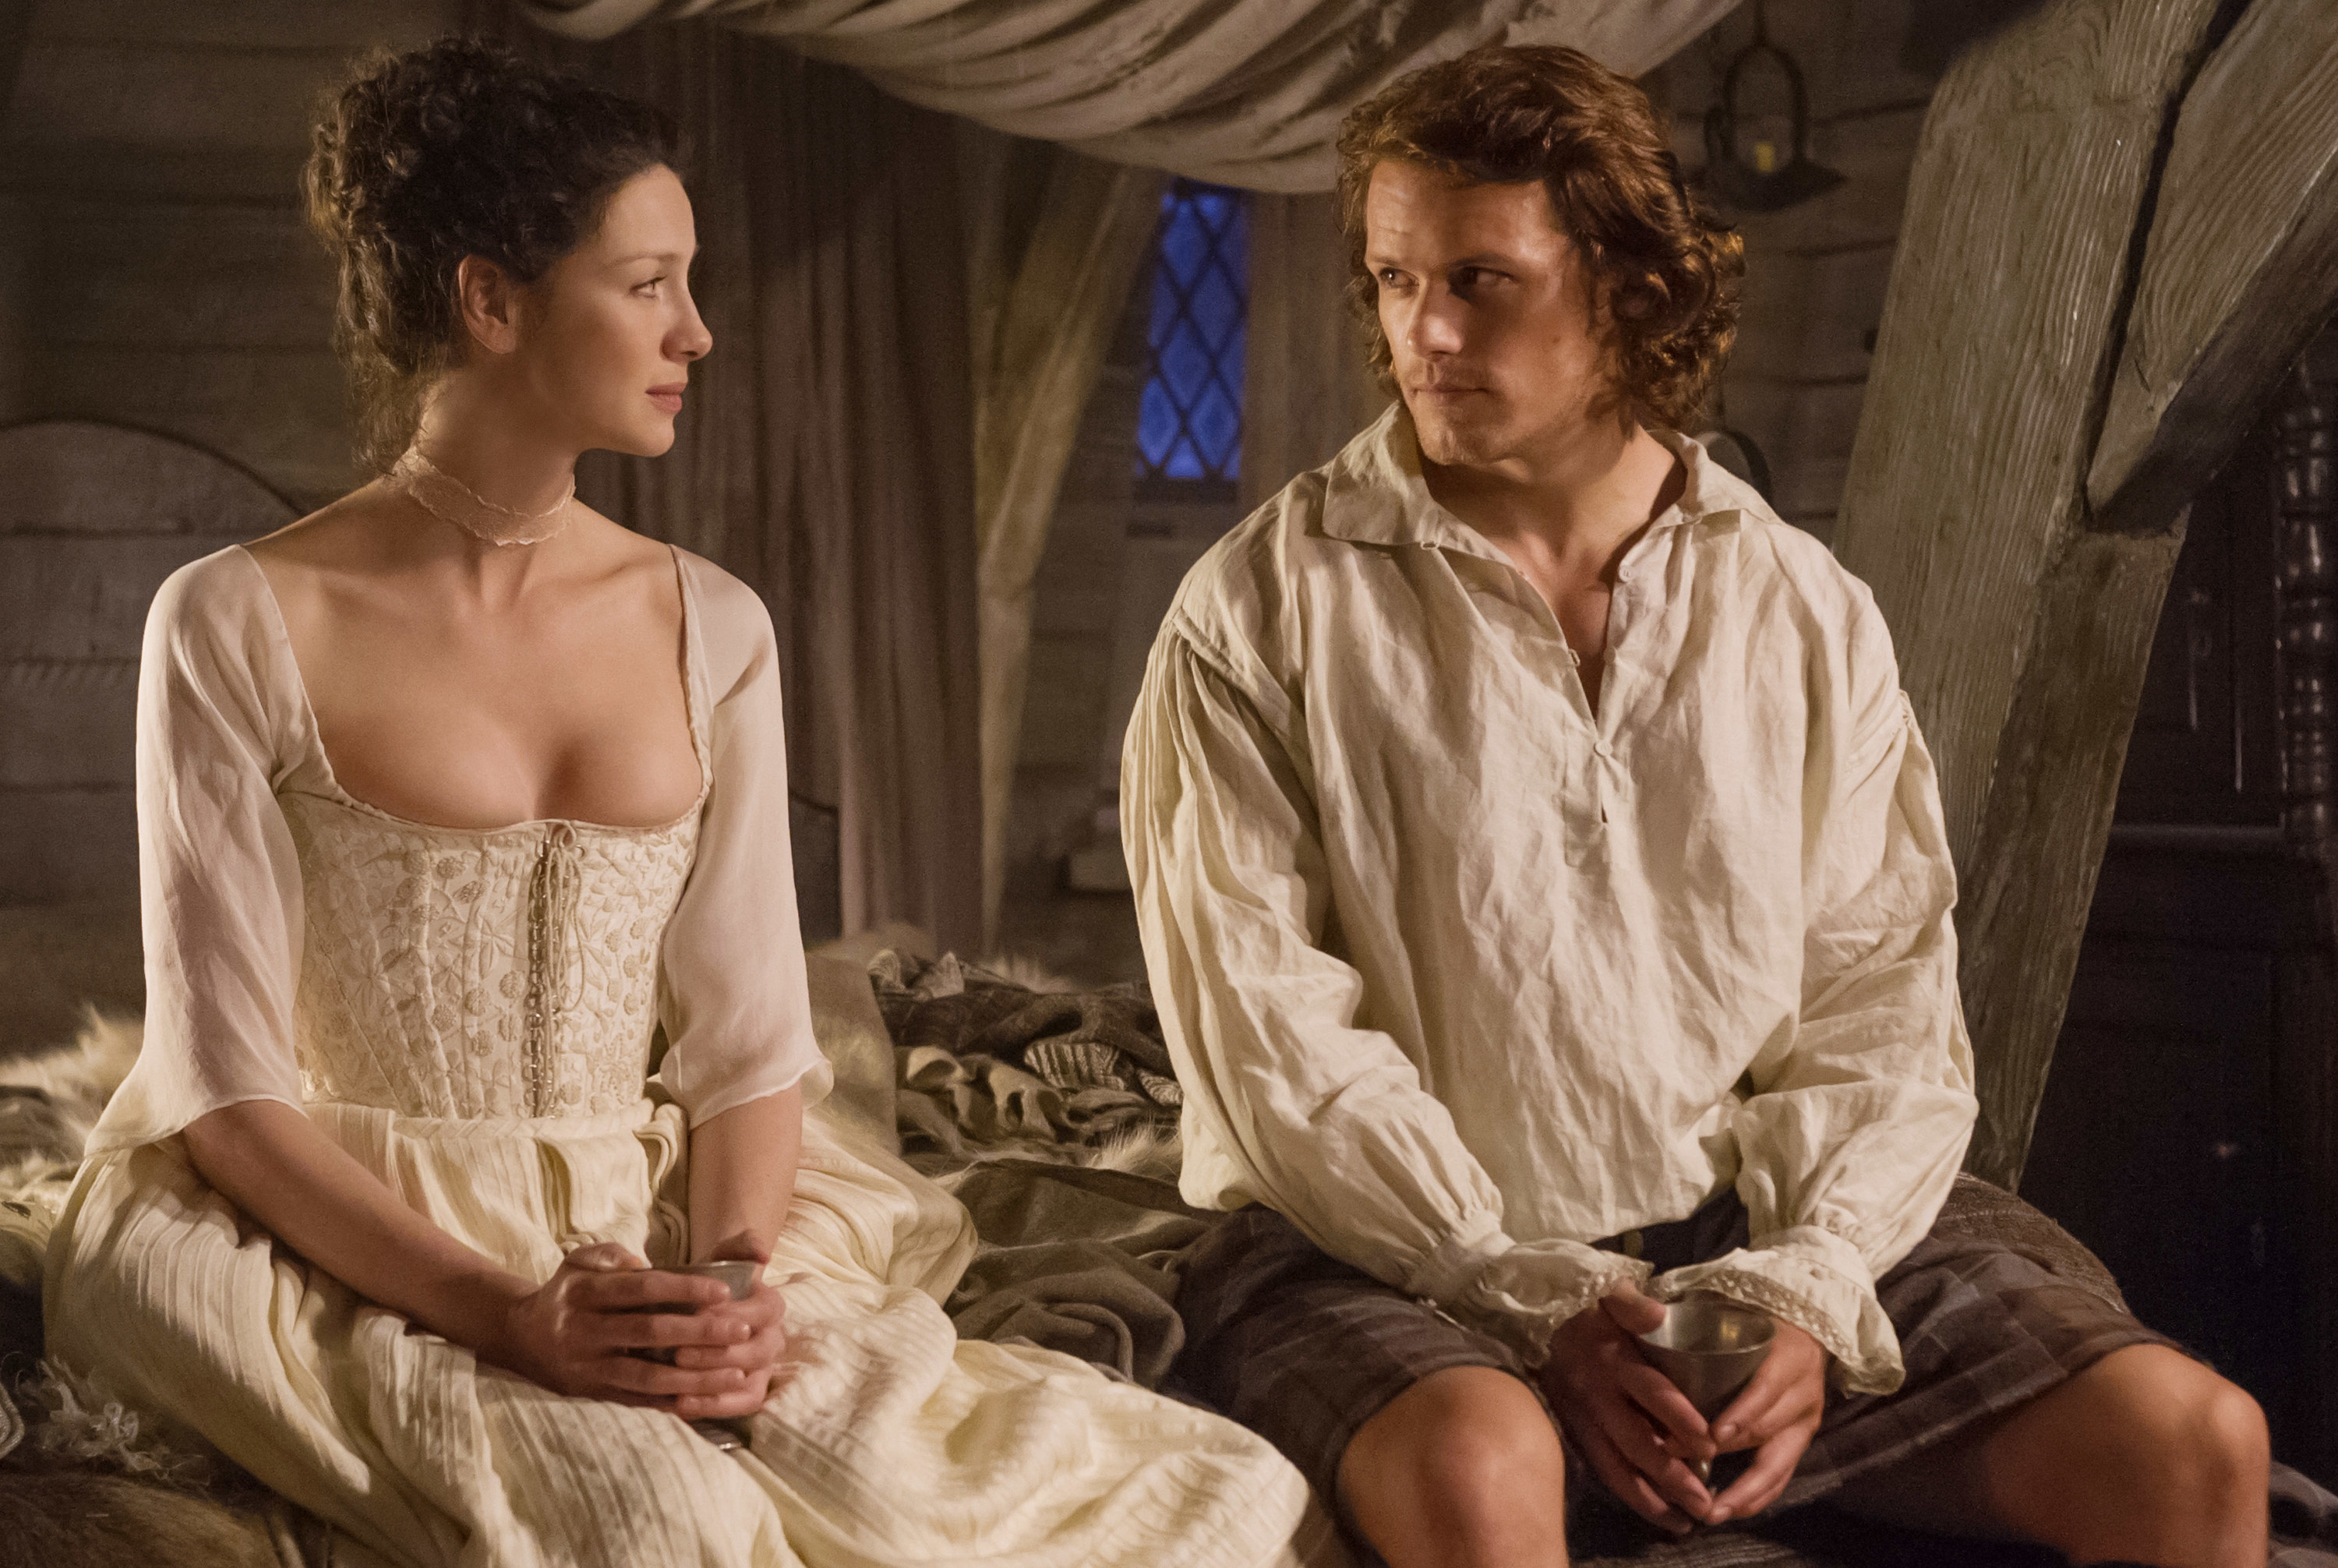 Jamie and Claire on their wedding night